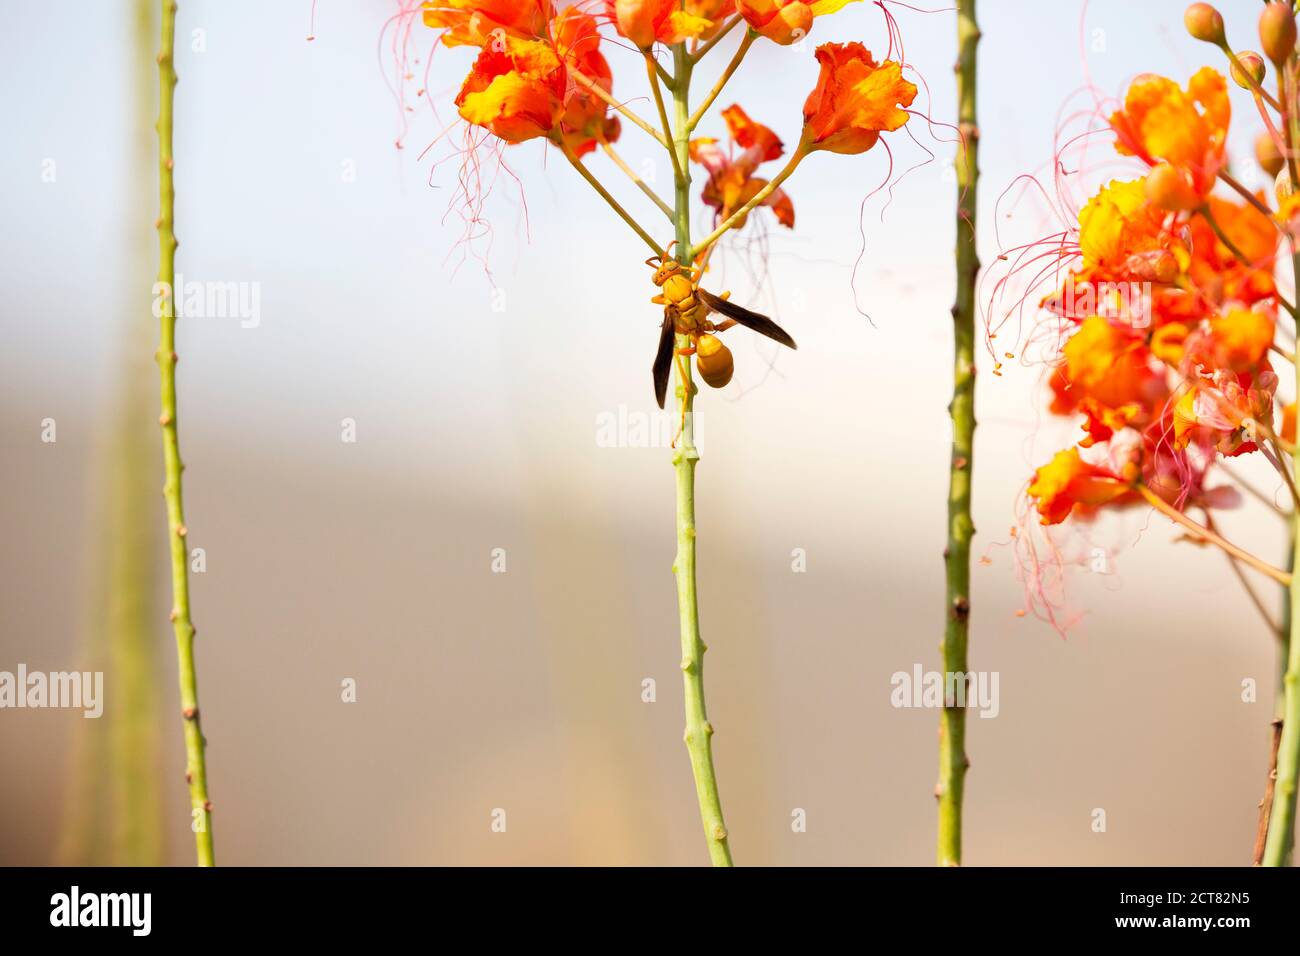 Golden hues of flower and insect match when Golden Paper Wasp lands on Red Bird of Paradise in Arizona Stock Photo